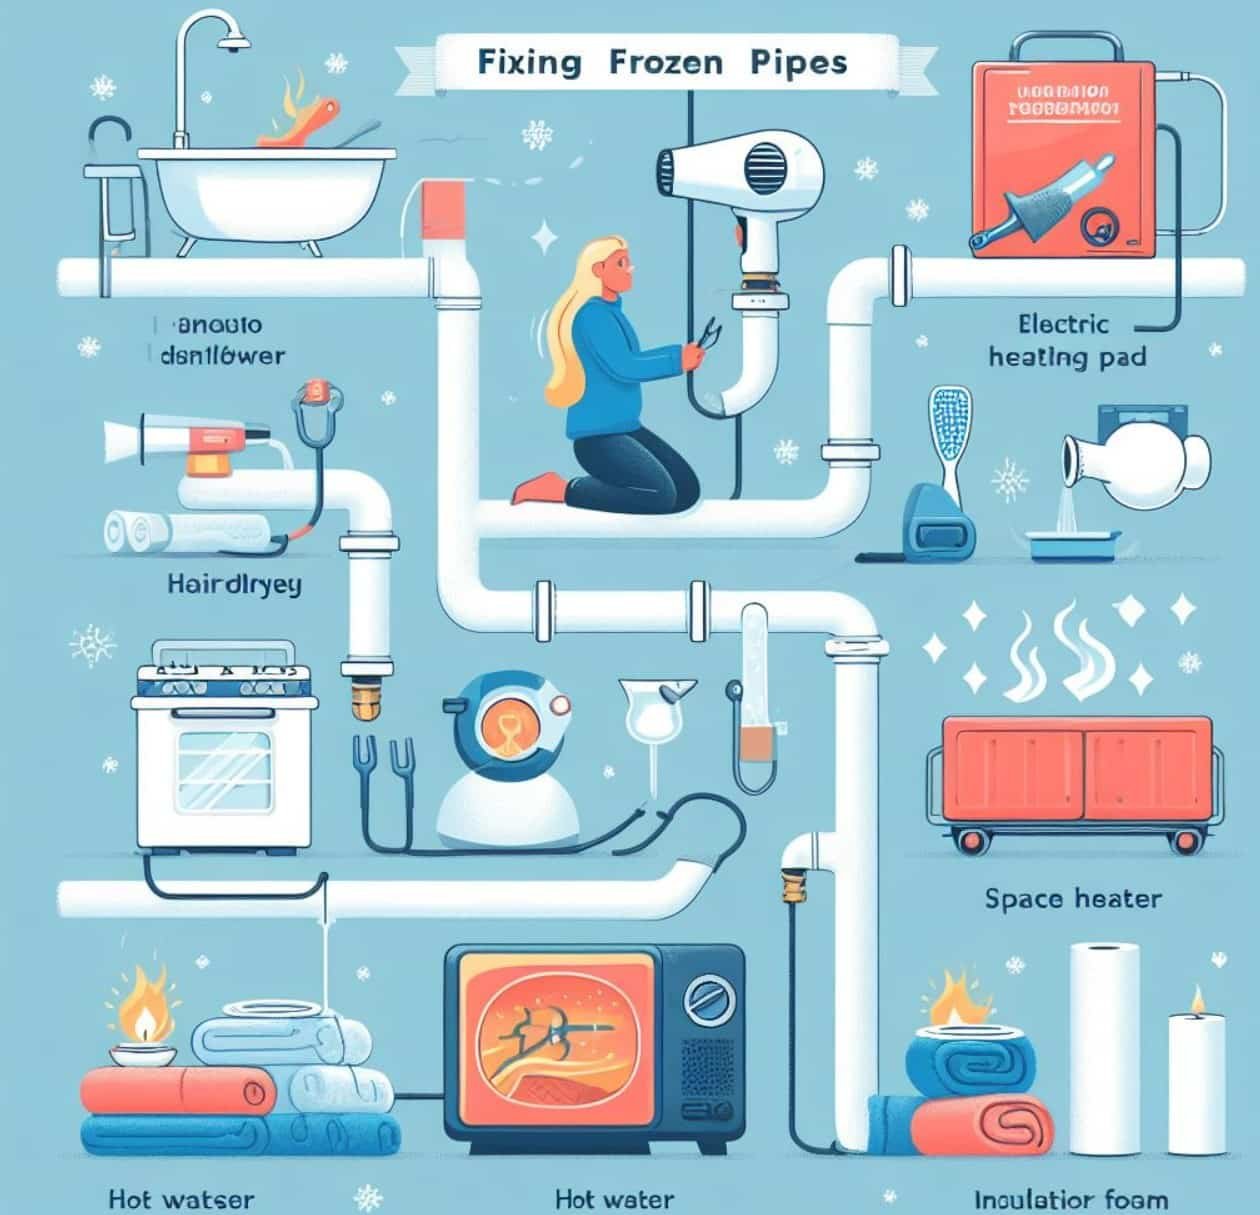 How To Fix Frozen Pipes